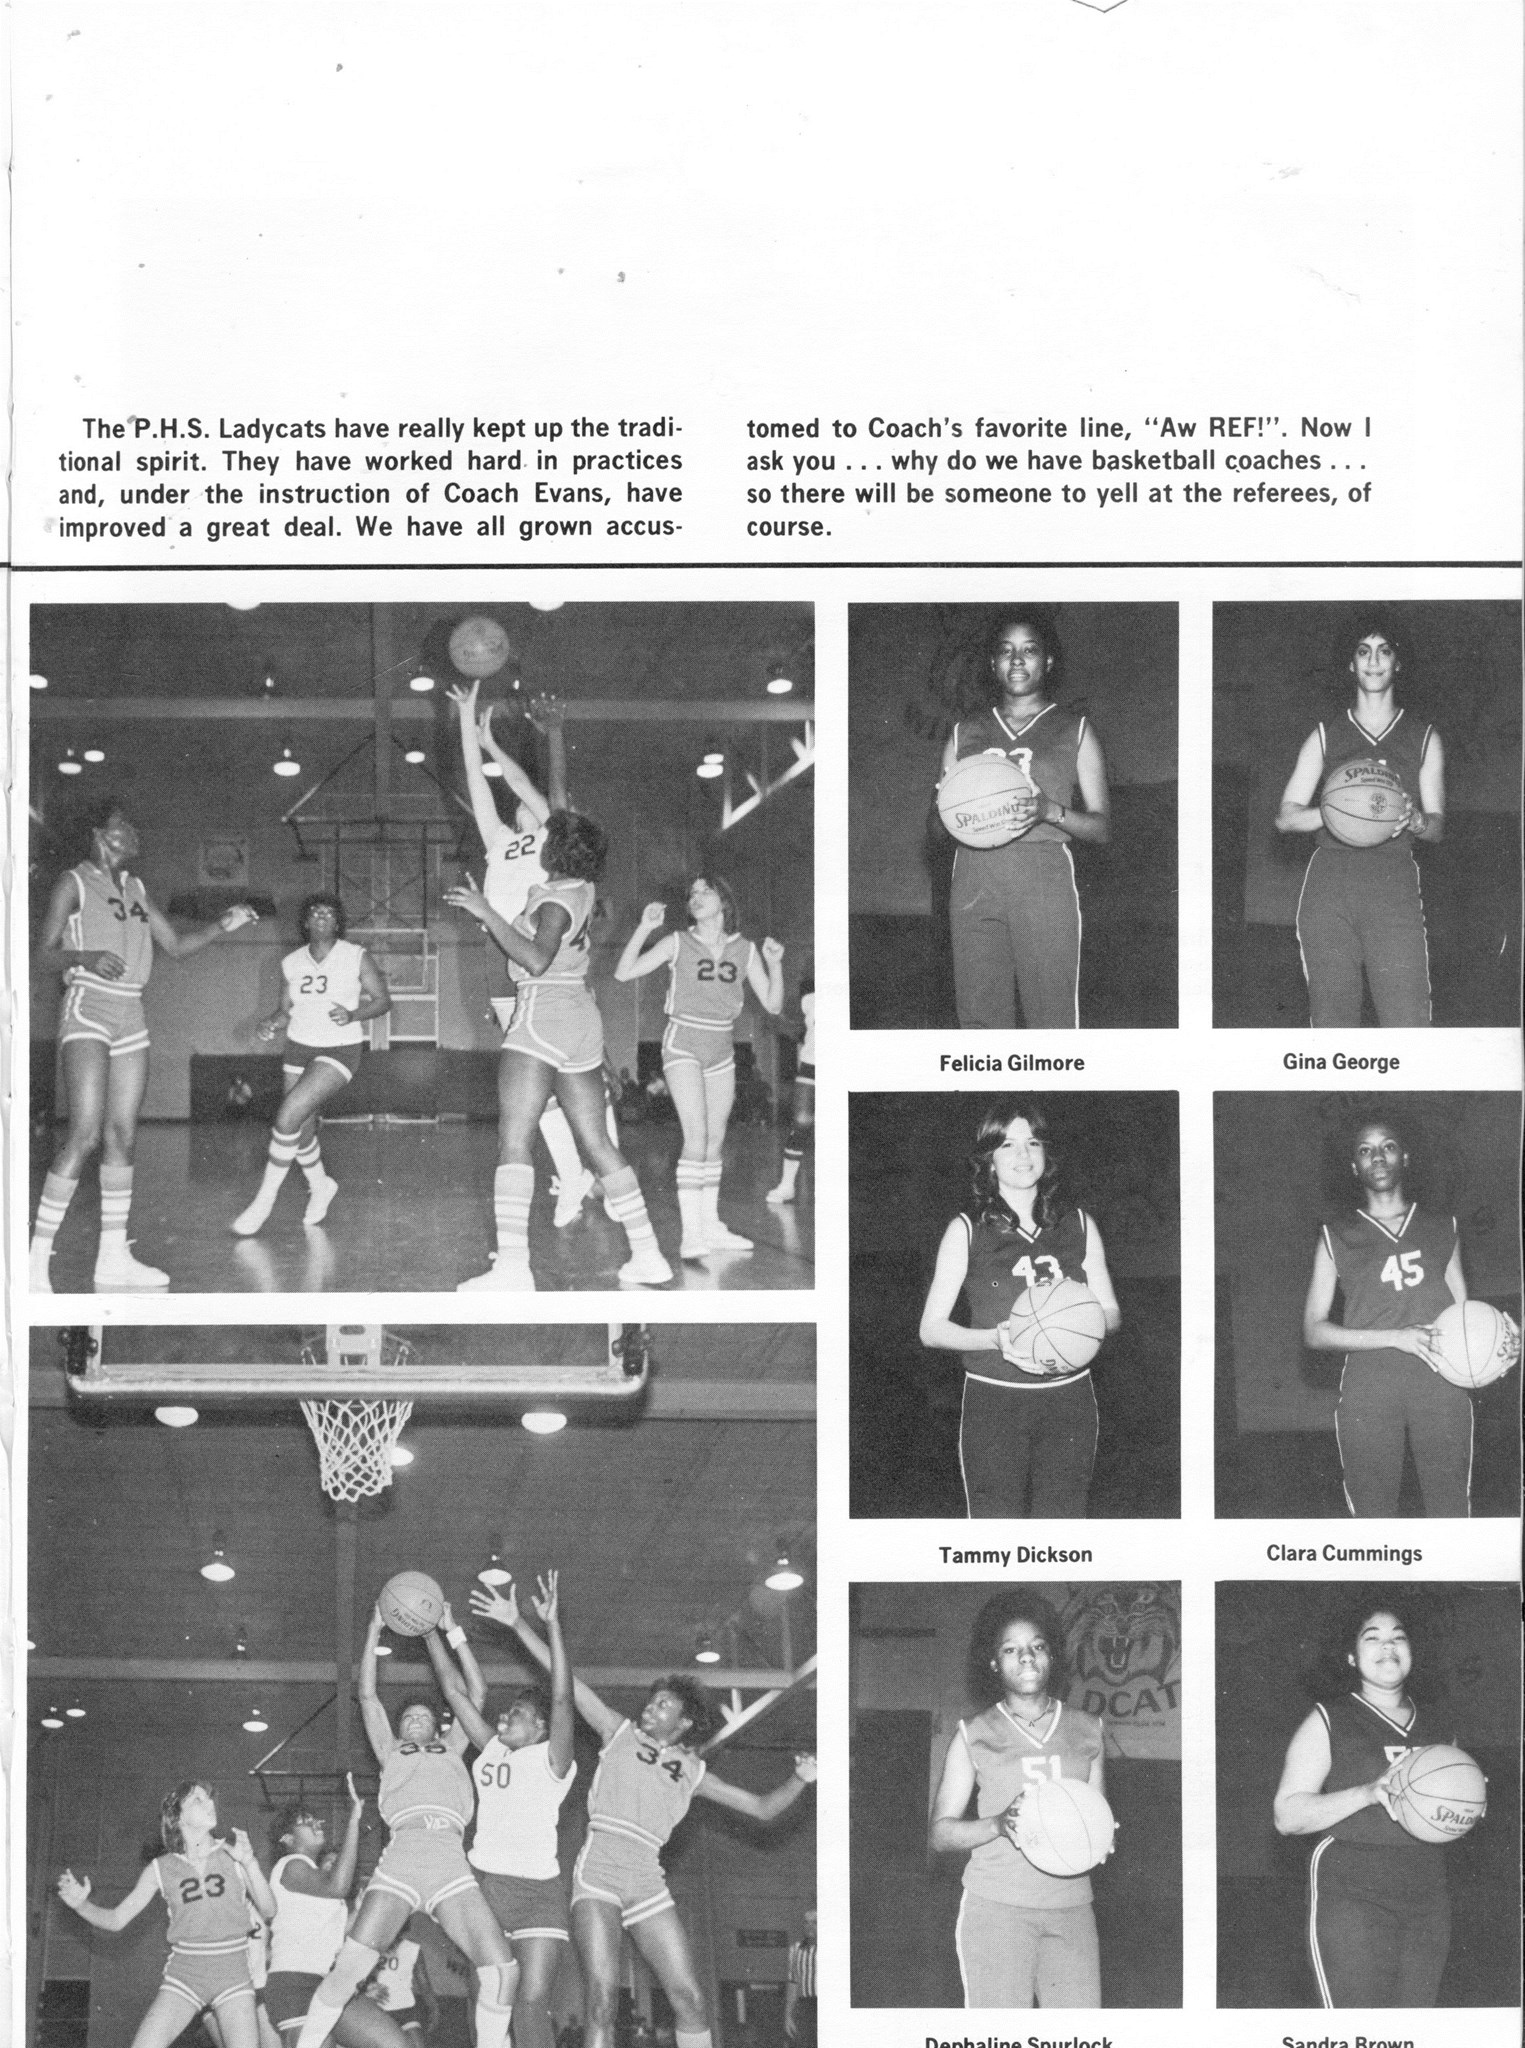 ../../../Images/Large/1980/Arclight-1980-pg0181.jpg